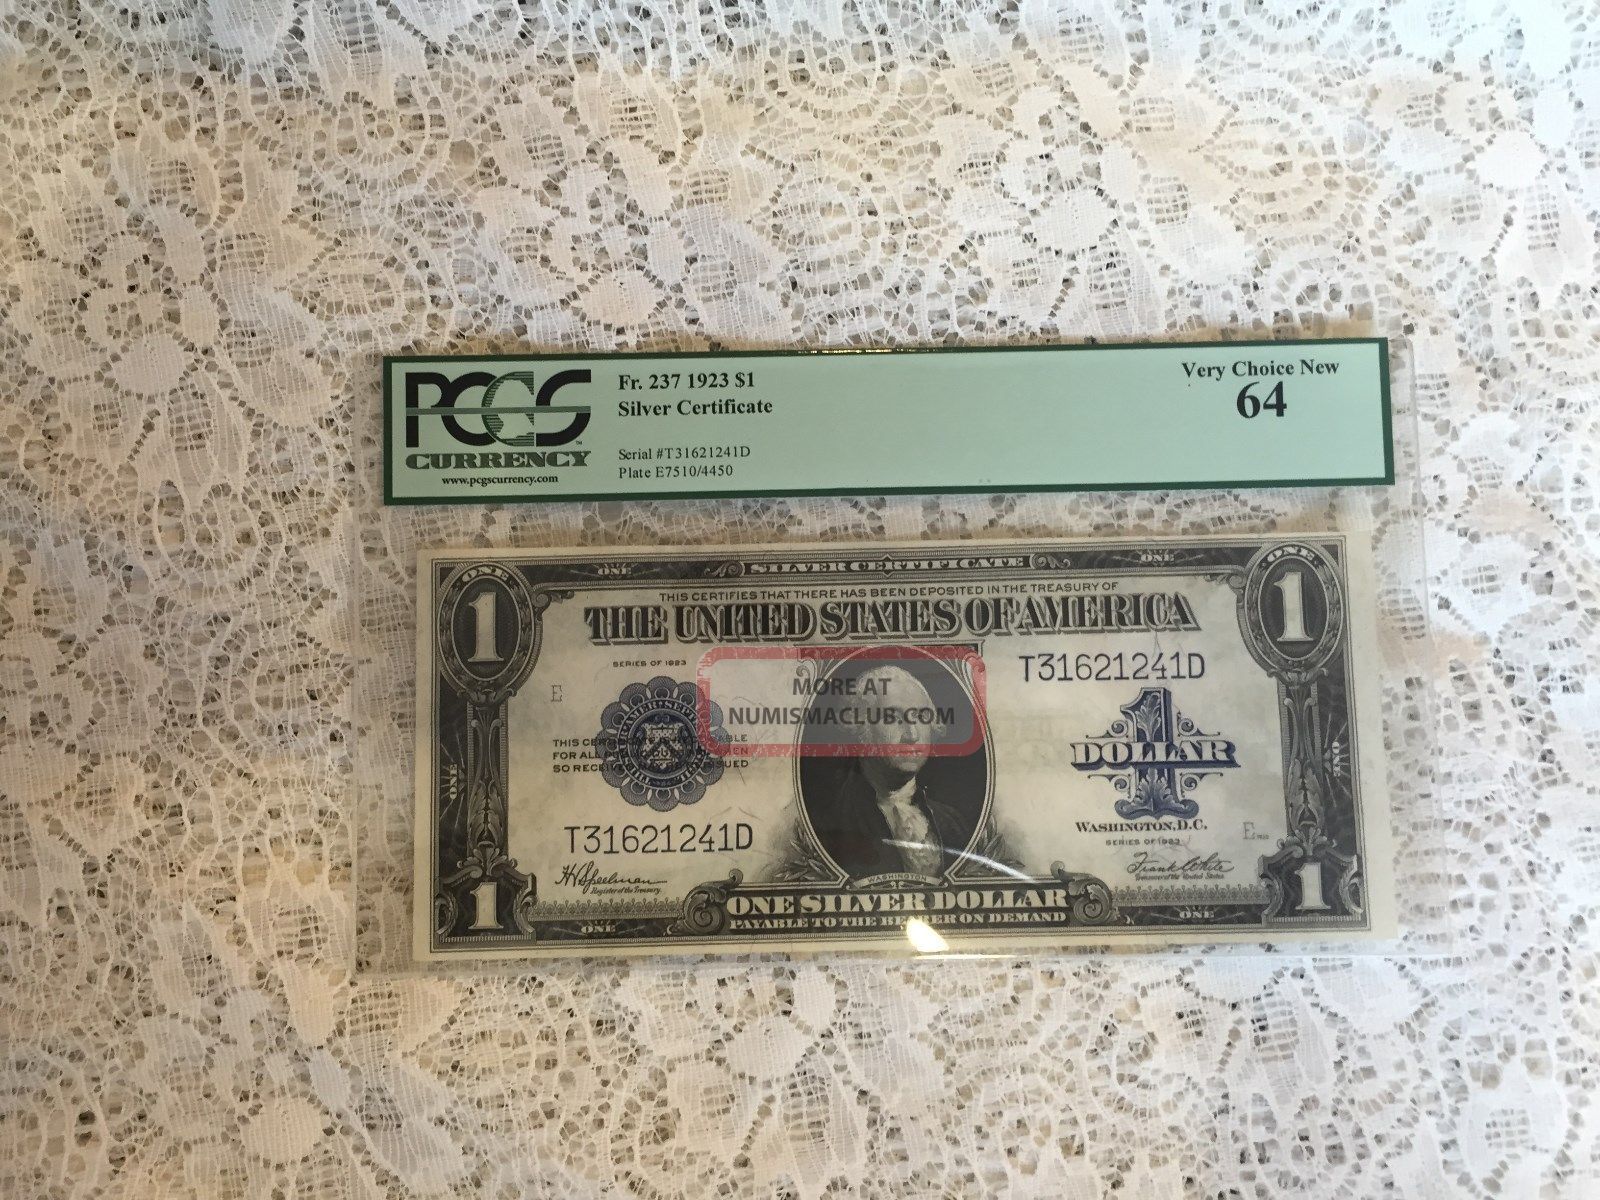 Ac Fr 237 $1 1923 Silver Certificate Pcgs Very Choice 64 Uncirculated Large Size Notes photo